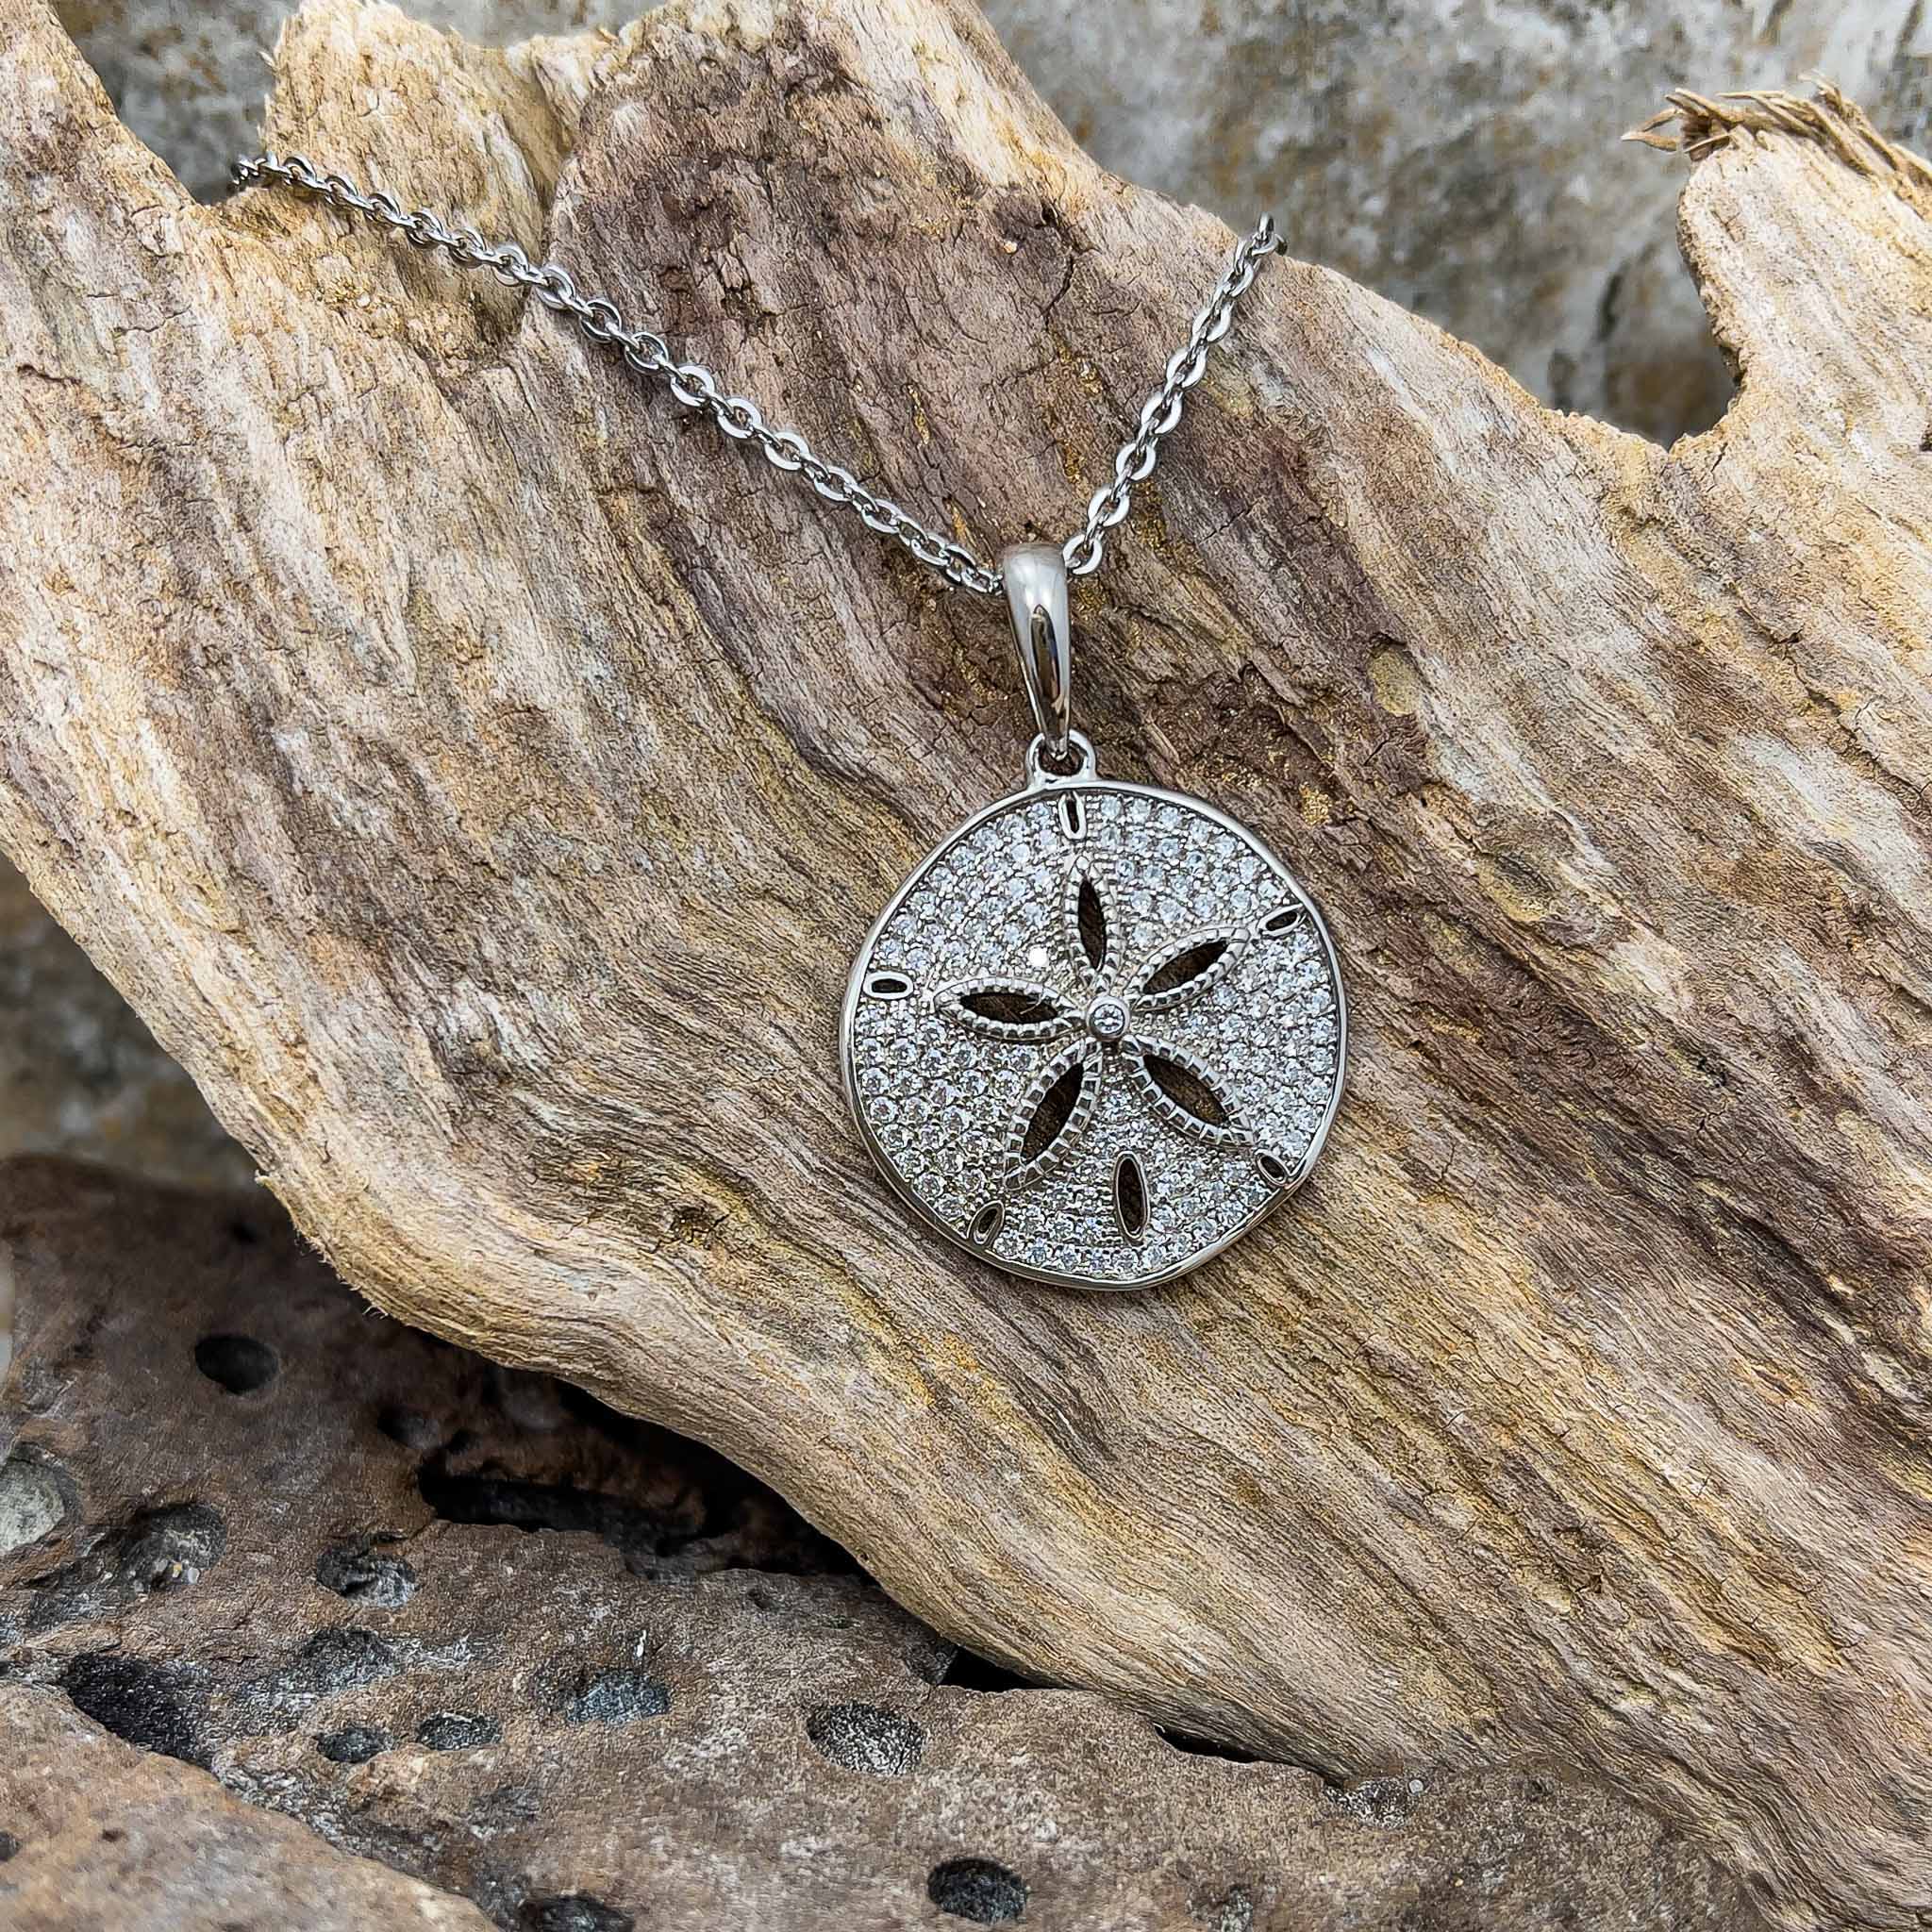 Two-Tone Sand Dollar Necklace – Whitmire's